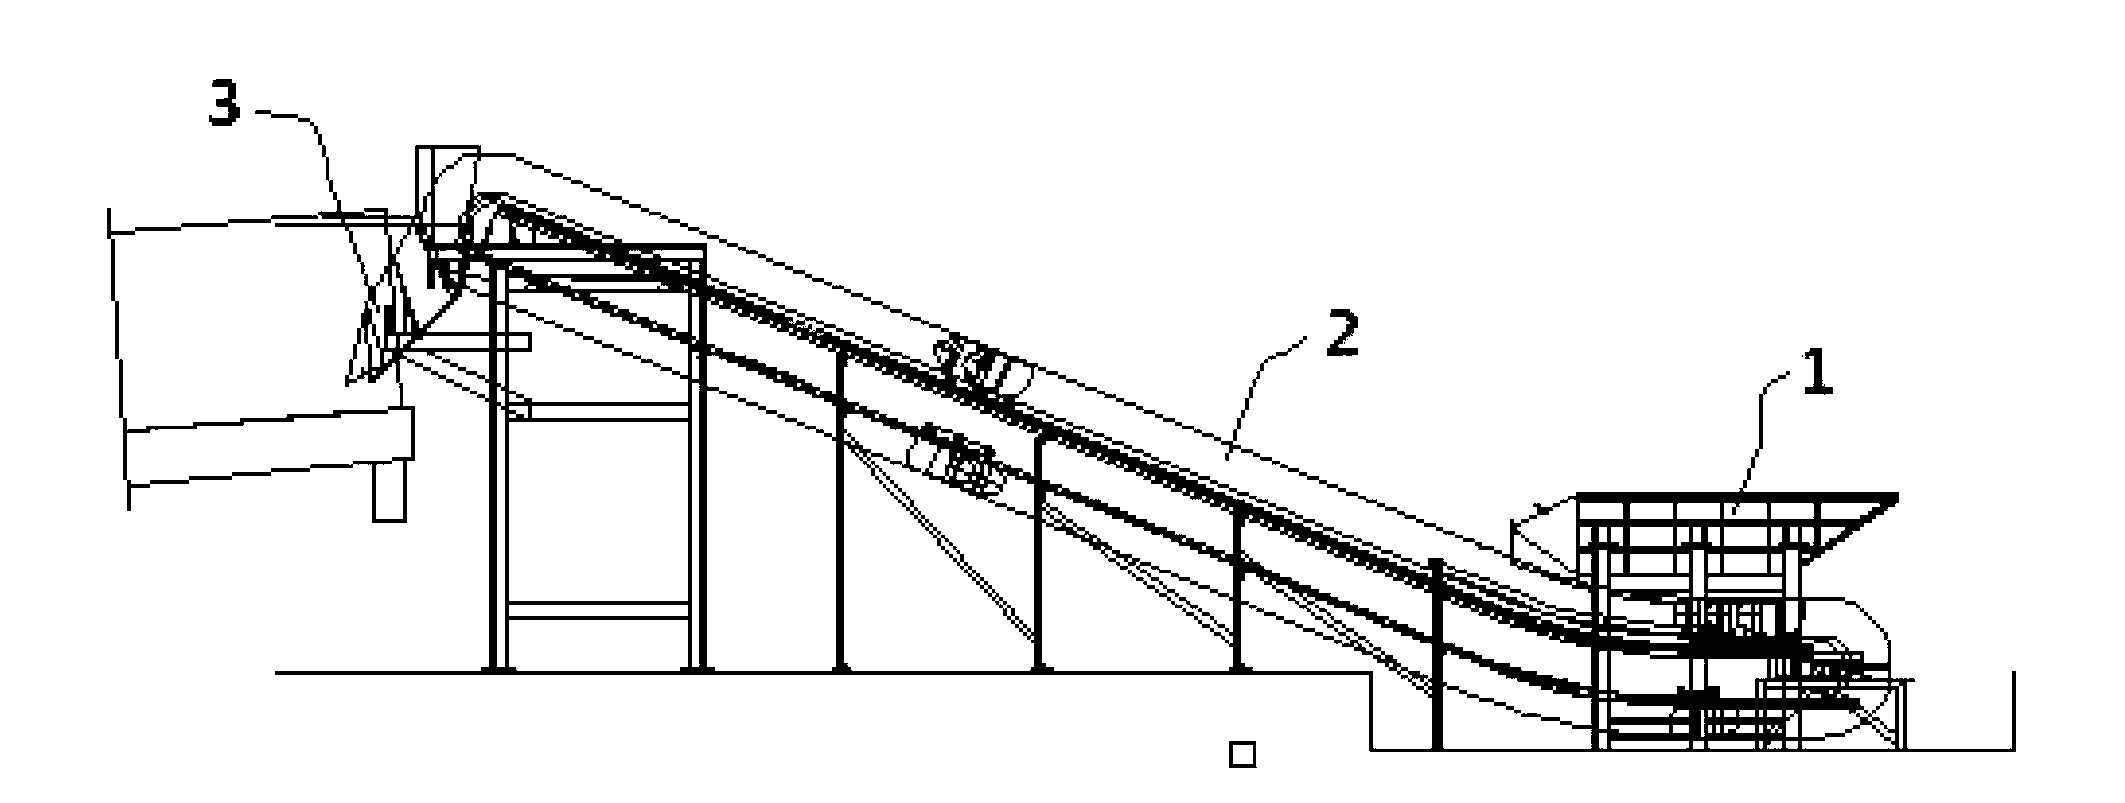 Chain scraper conveyor system for conveying waste purple impure copper